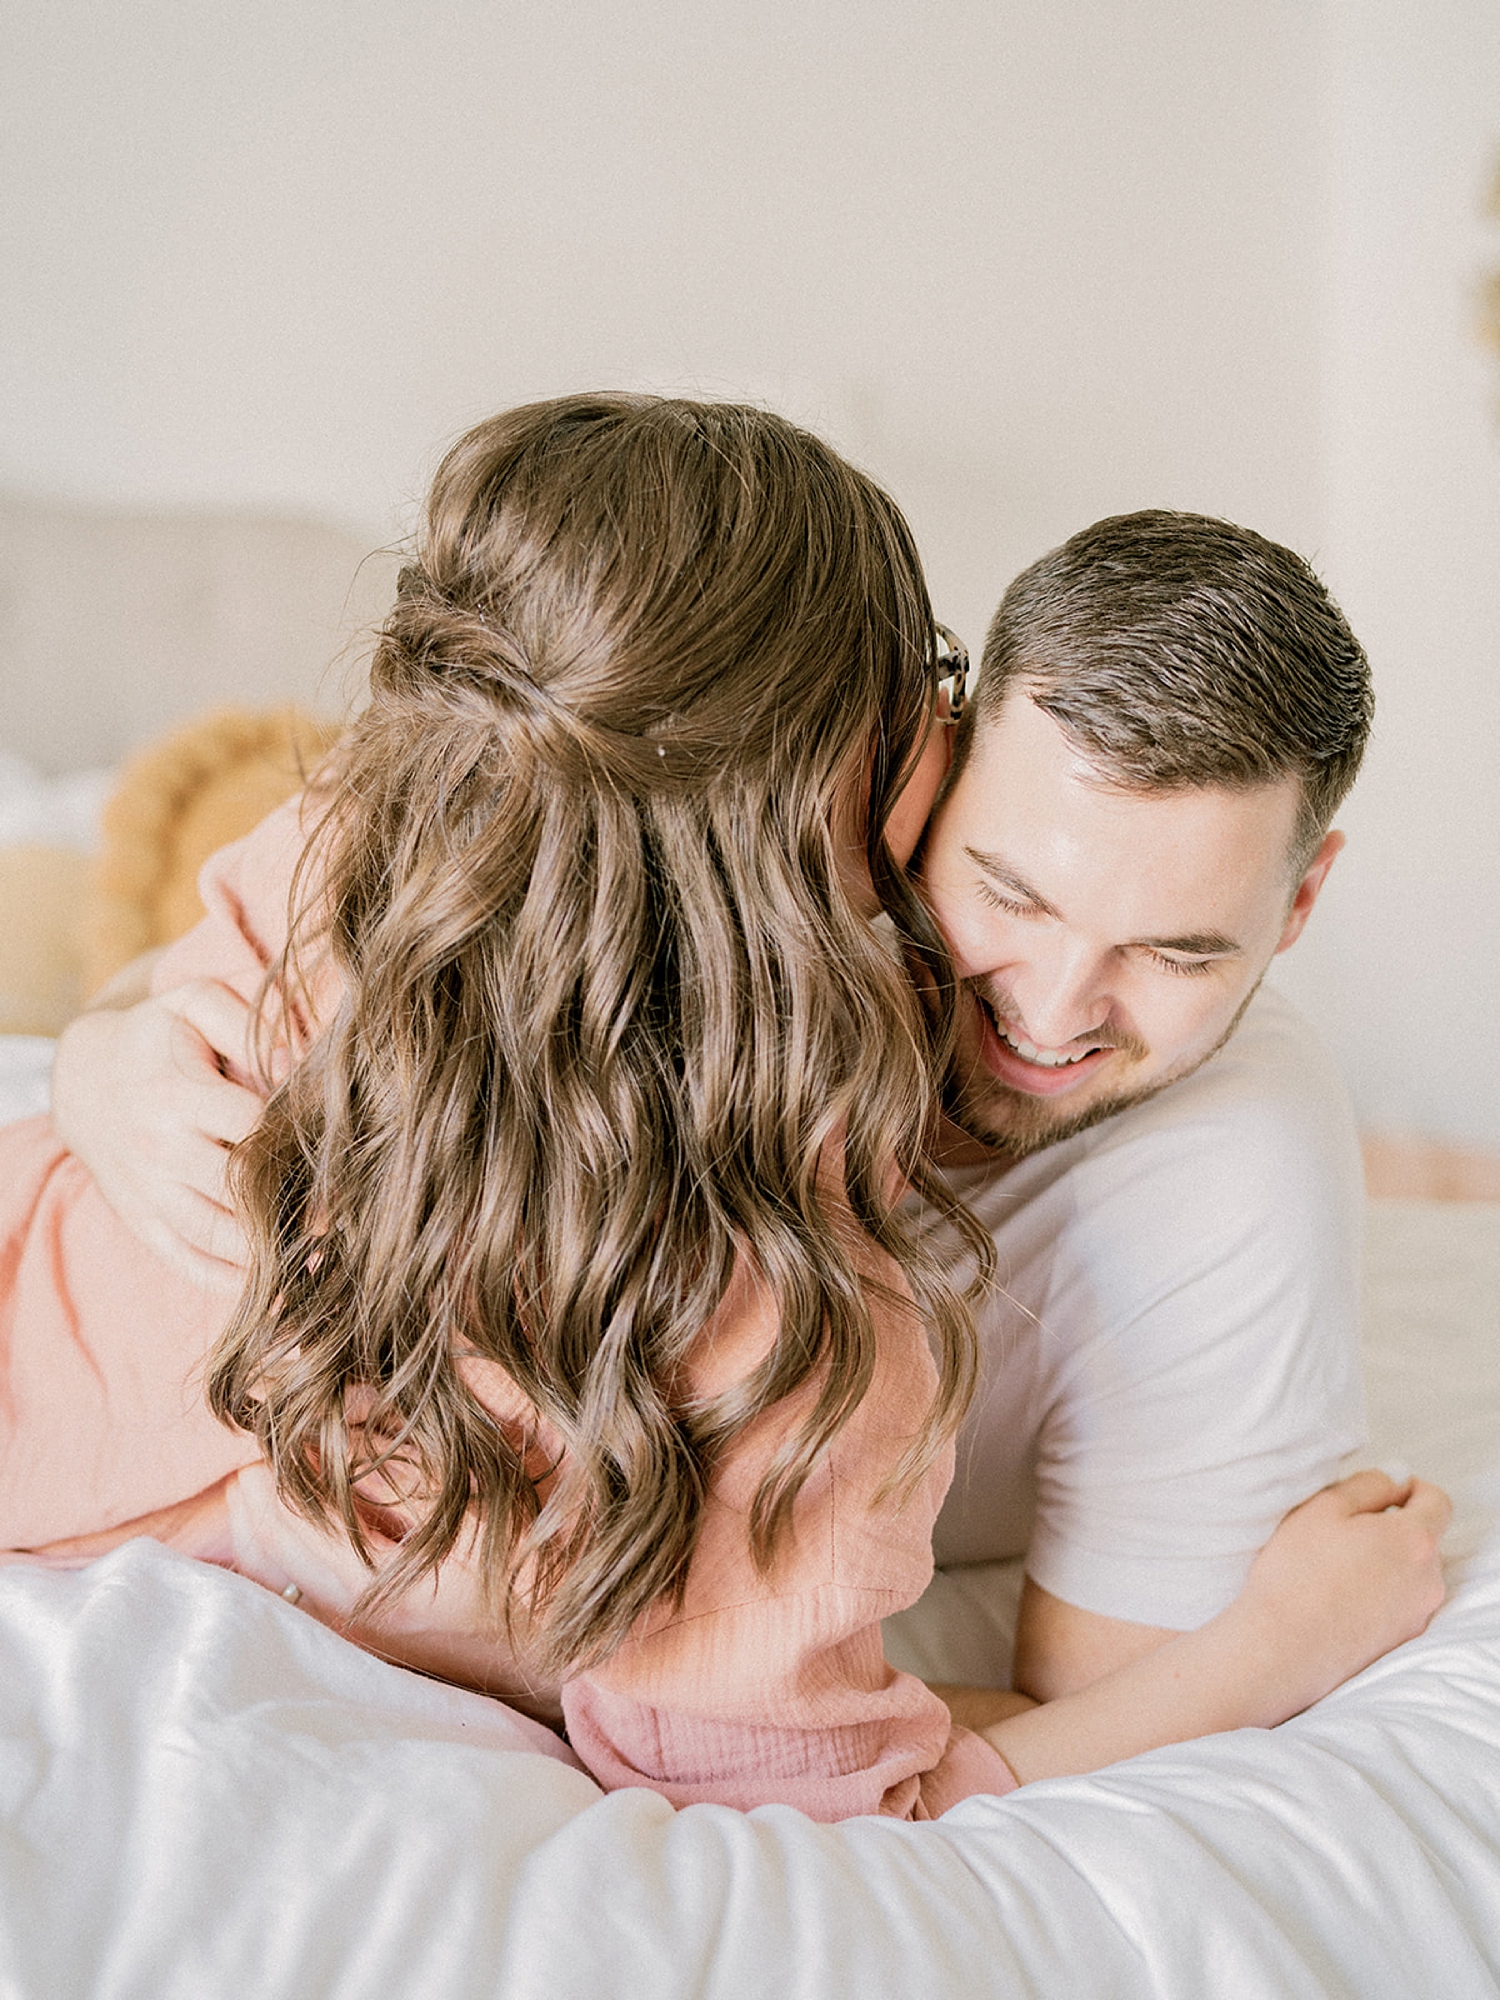 couple cuddles on bed during anniversary photos at home